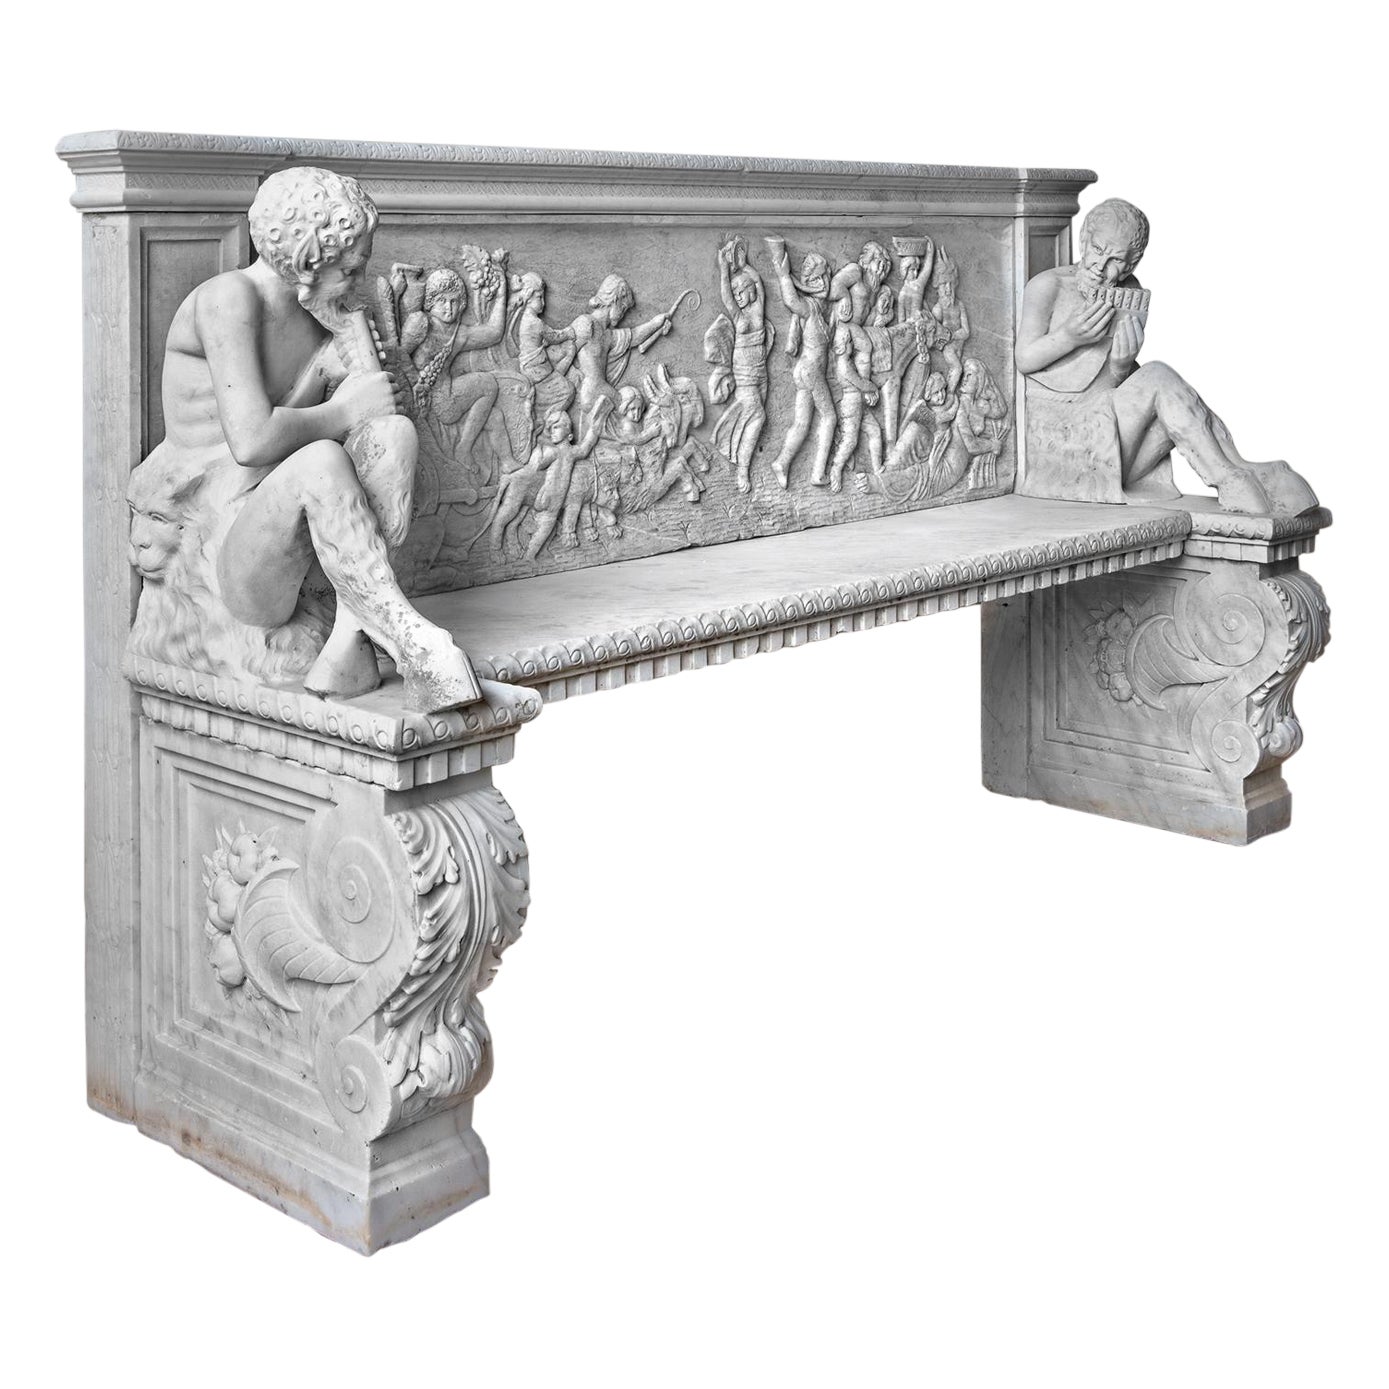 A Rare and Impressive Carved White Marble Neoclassical Bench For Sale